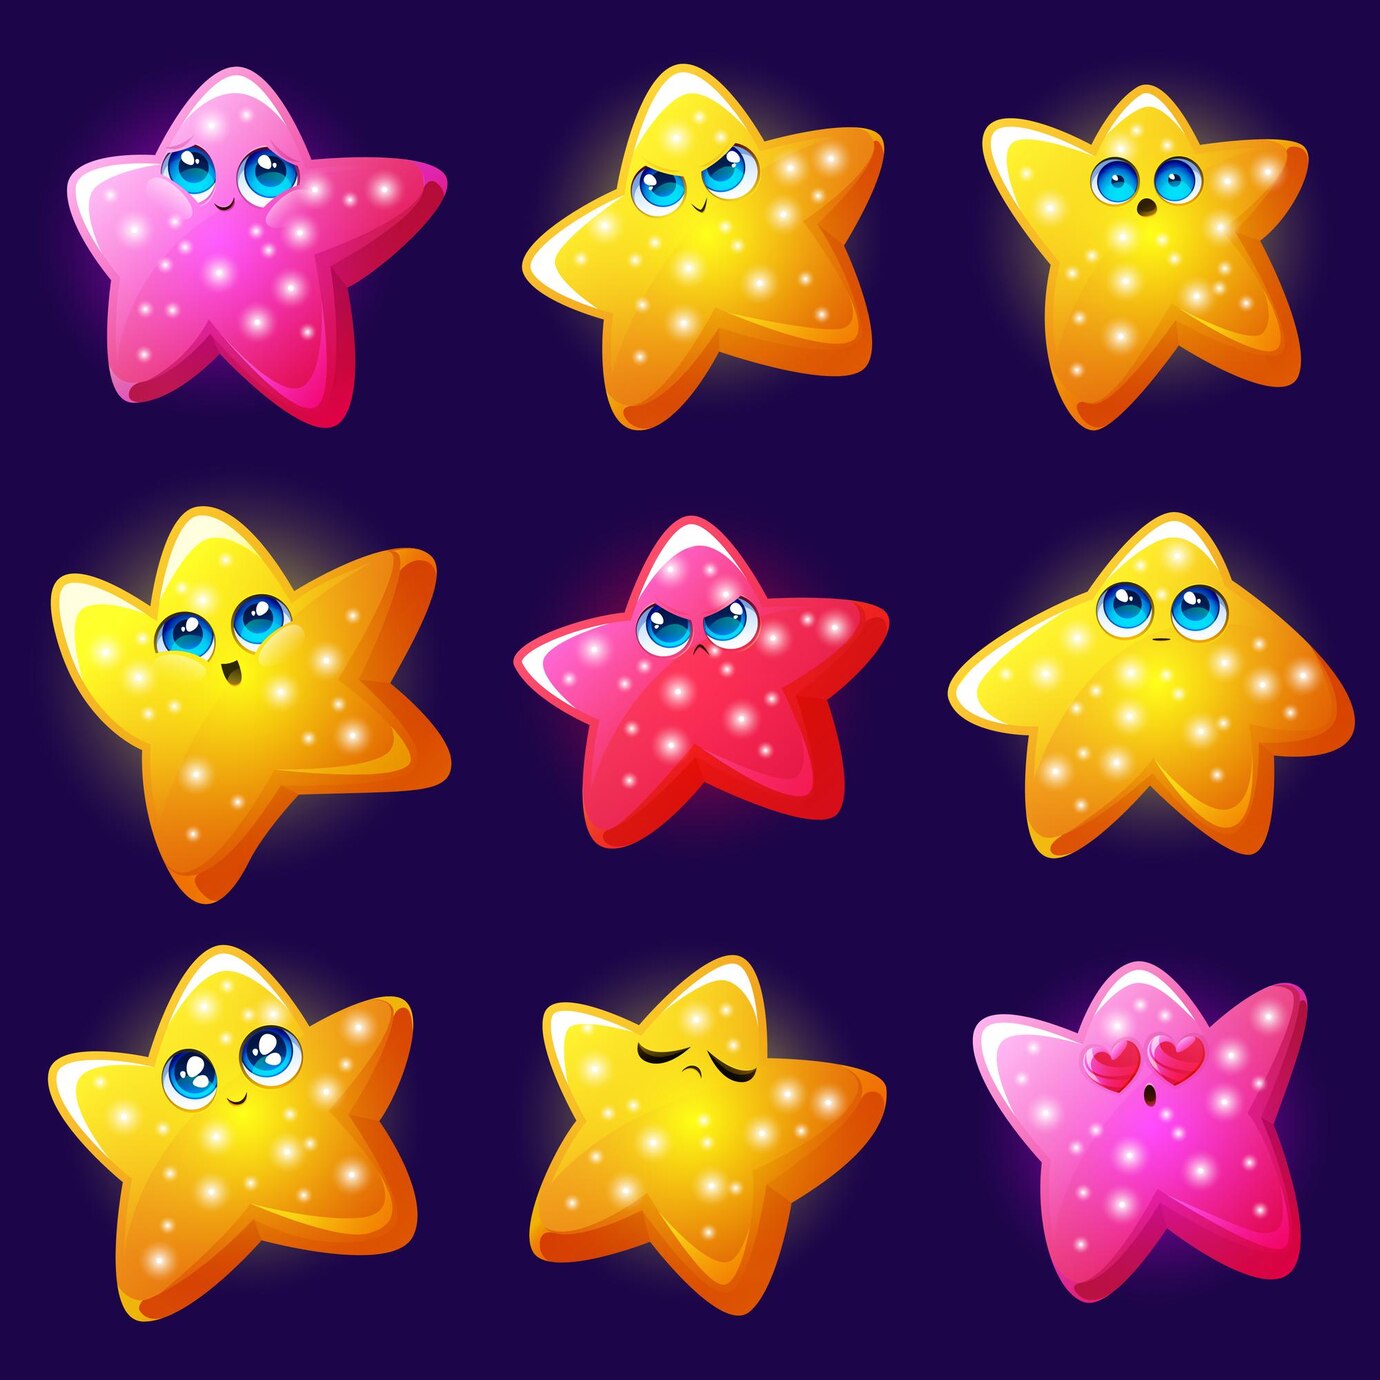 Cute Star Emoji Gold Shiny Faces With Different Emotions Isolated Blue Background Vector Cartoon Set Funny Star Character With Happy Smile Excited Angry Arrogant Confused Love 107791 8850